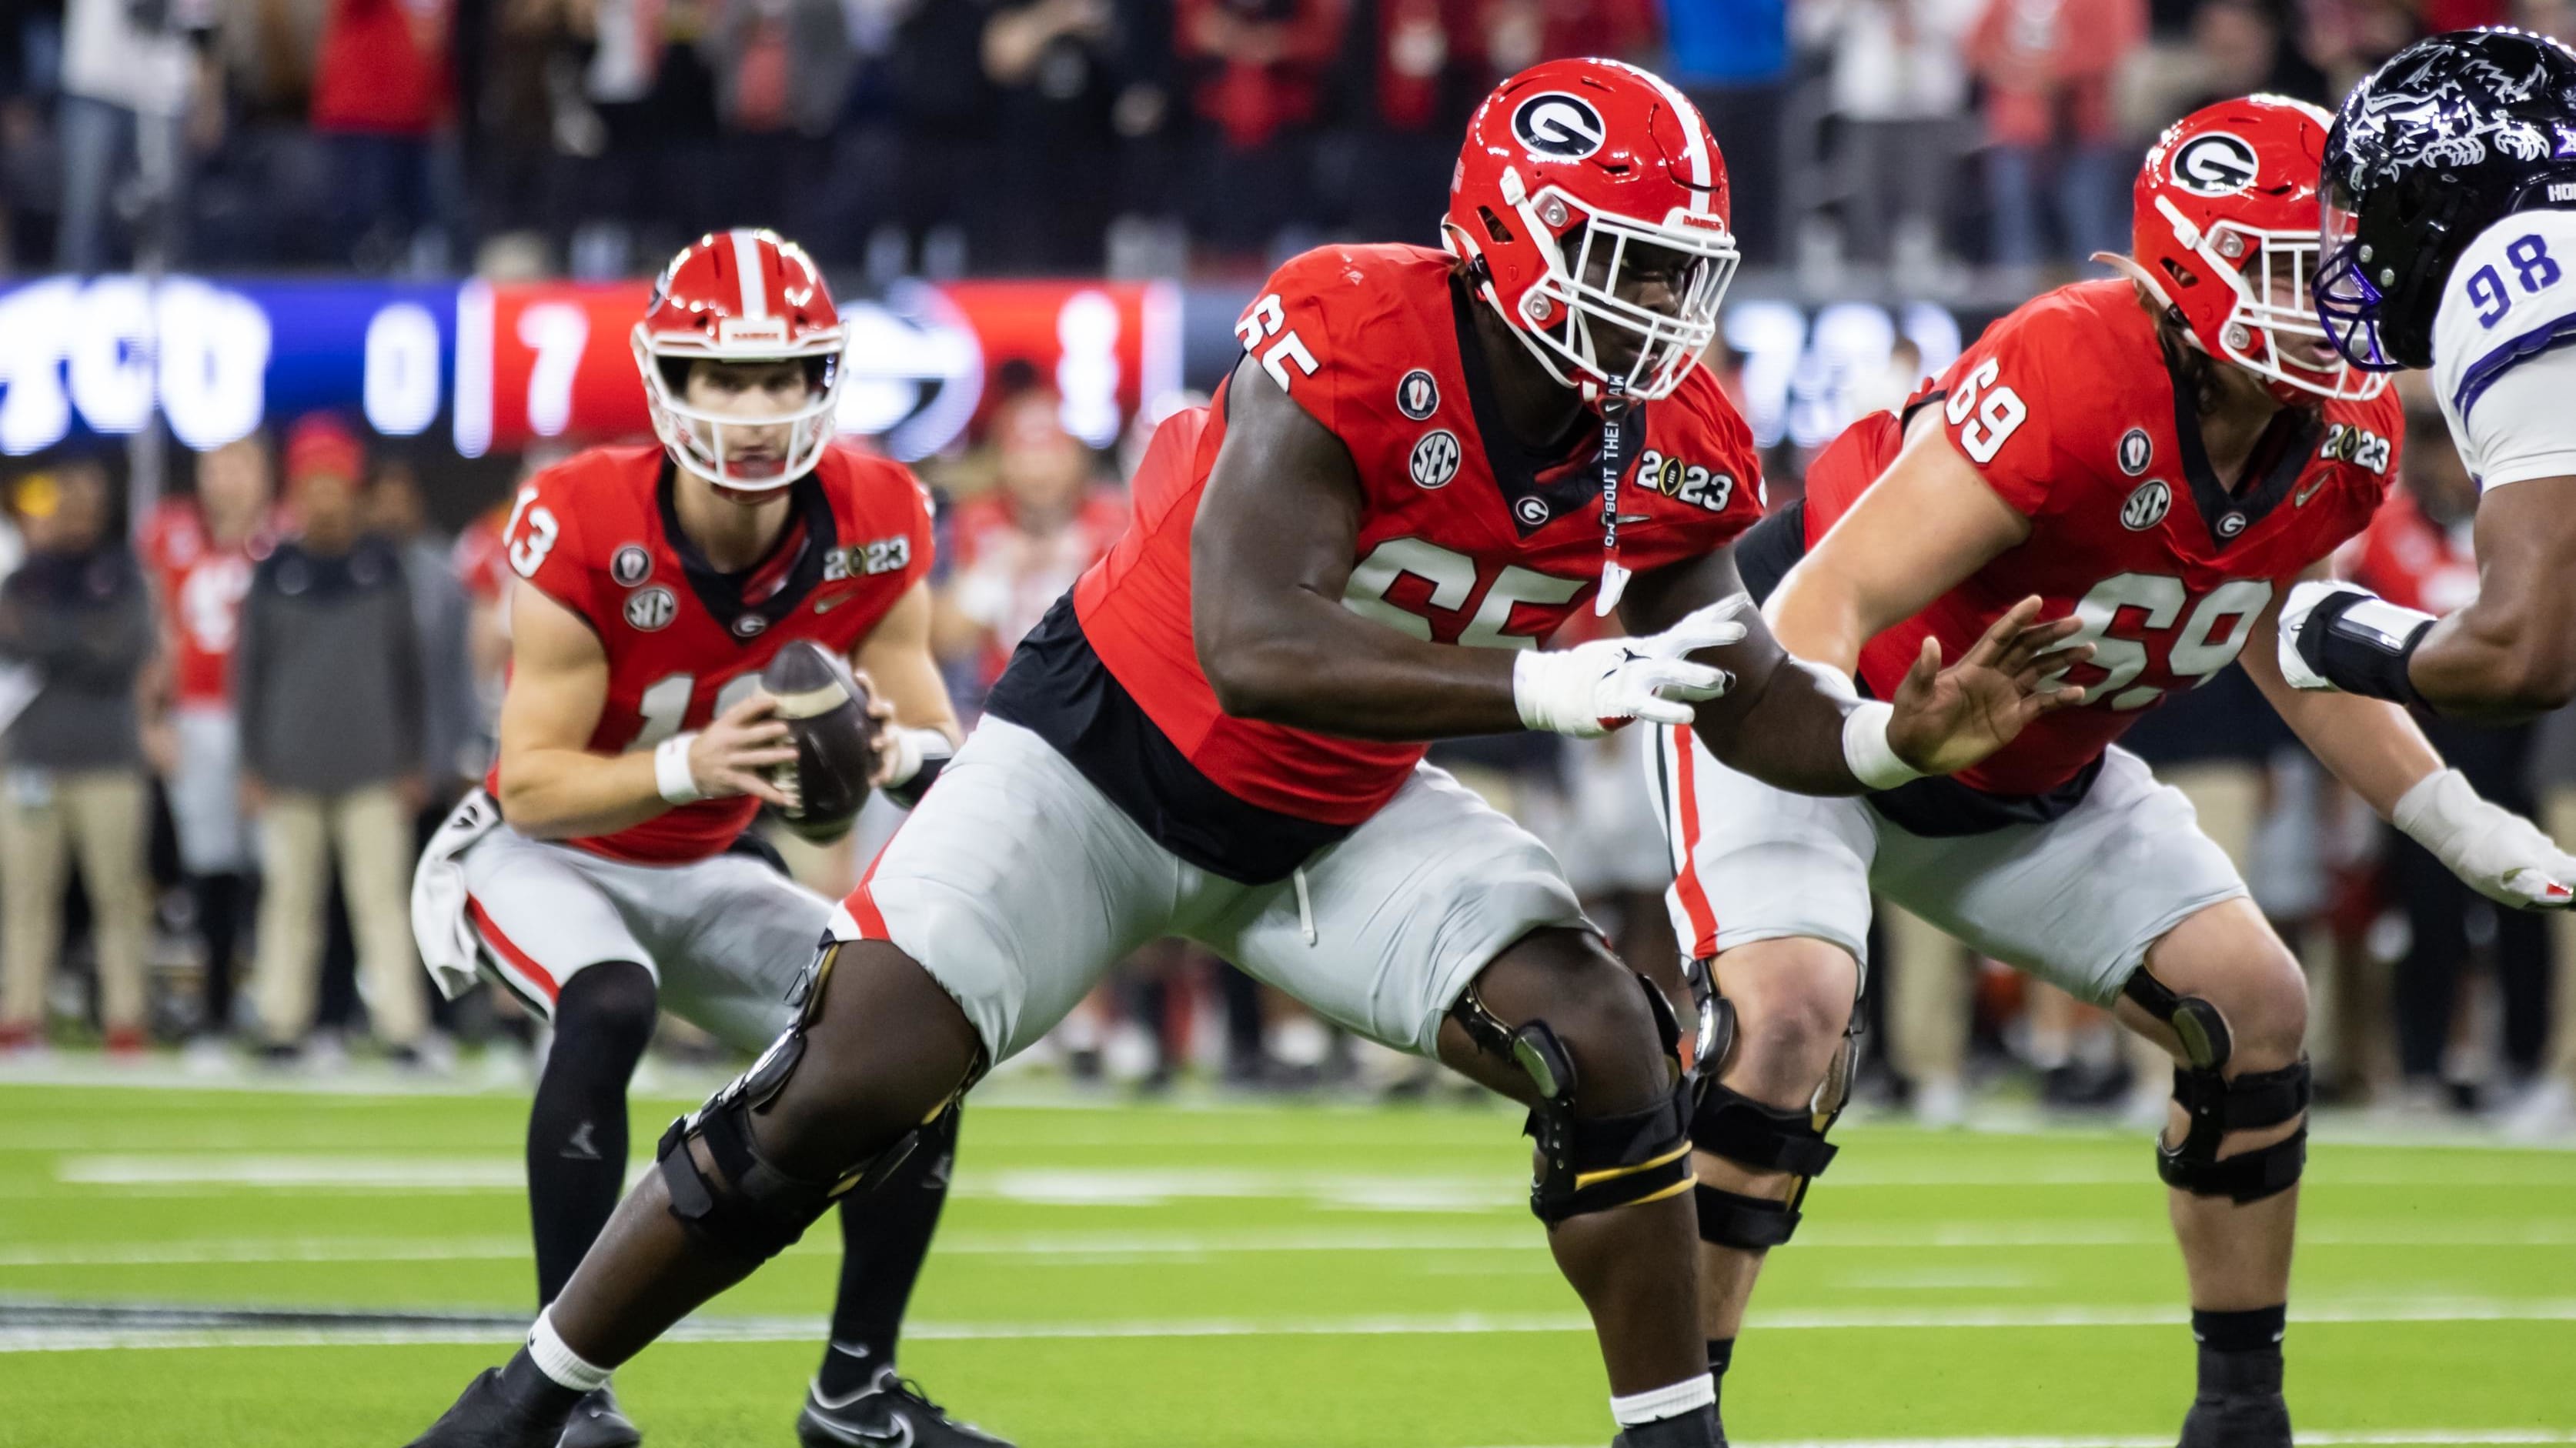 Georgia Bulldogs offensive lineman Amarius Mims lines up during a snap.